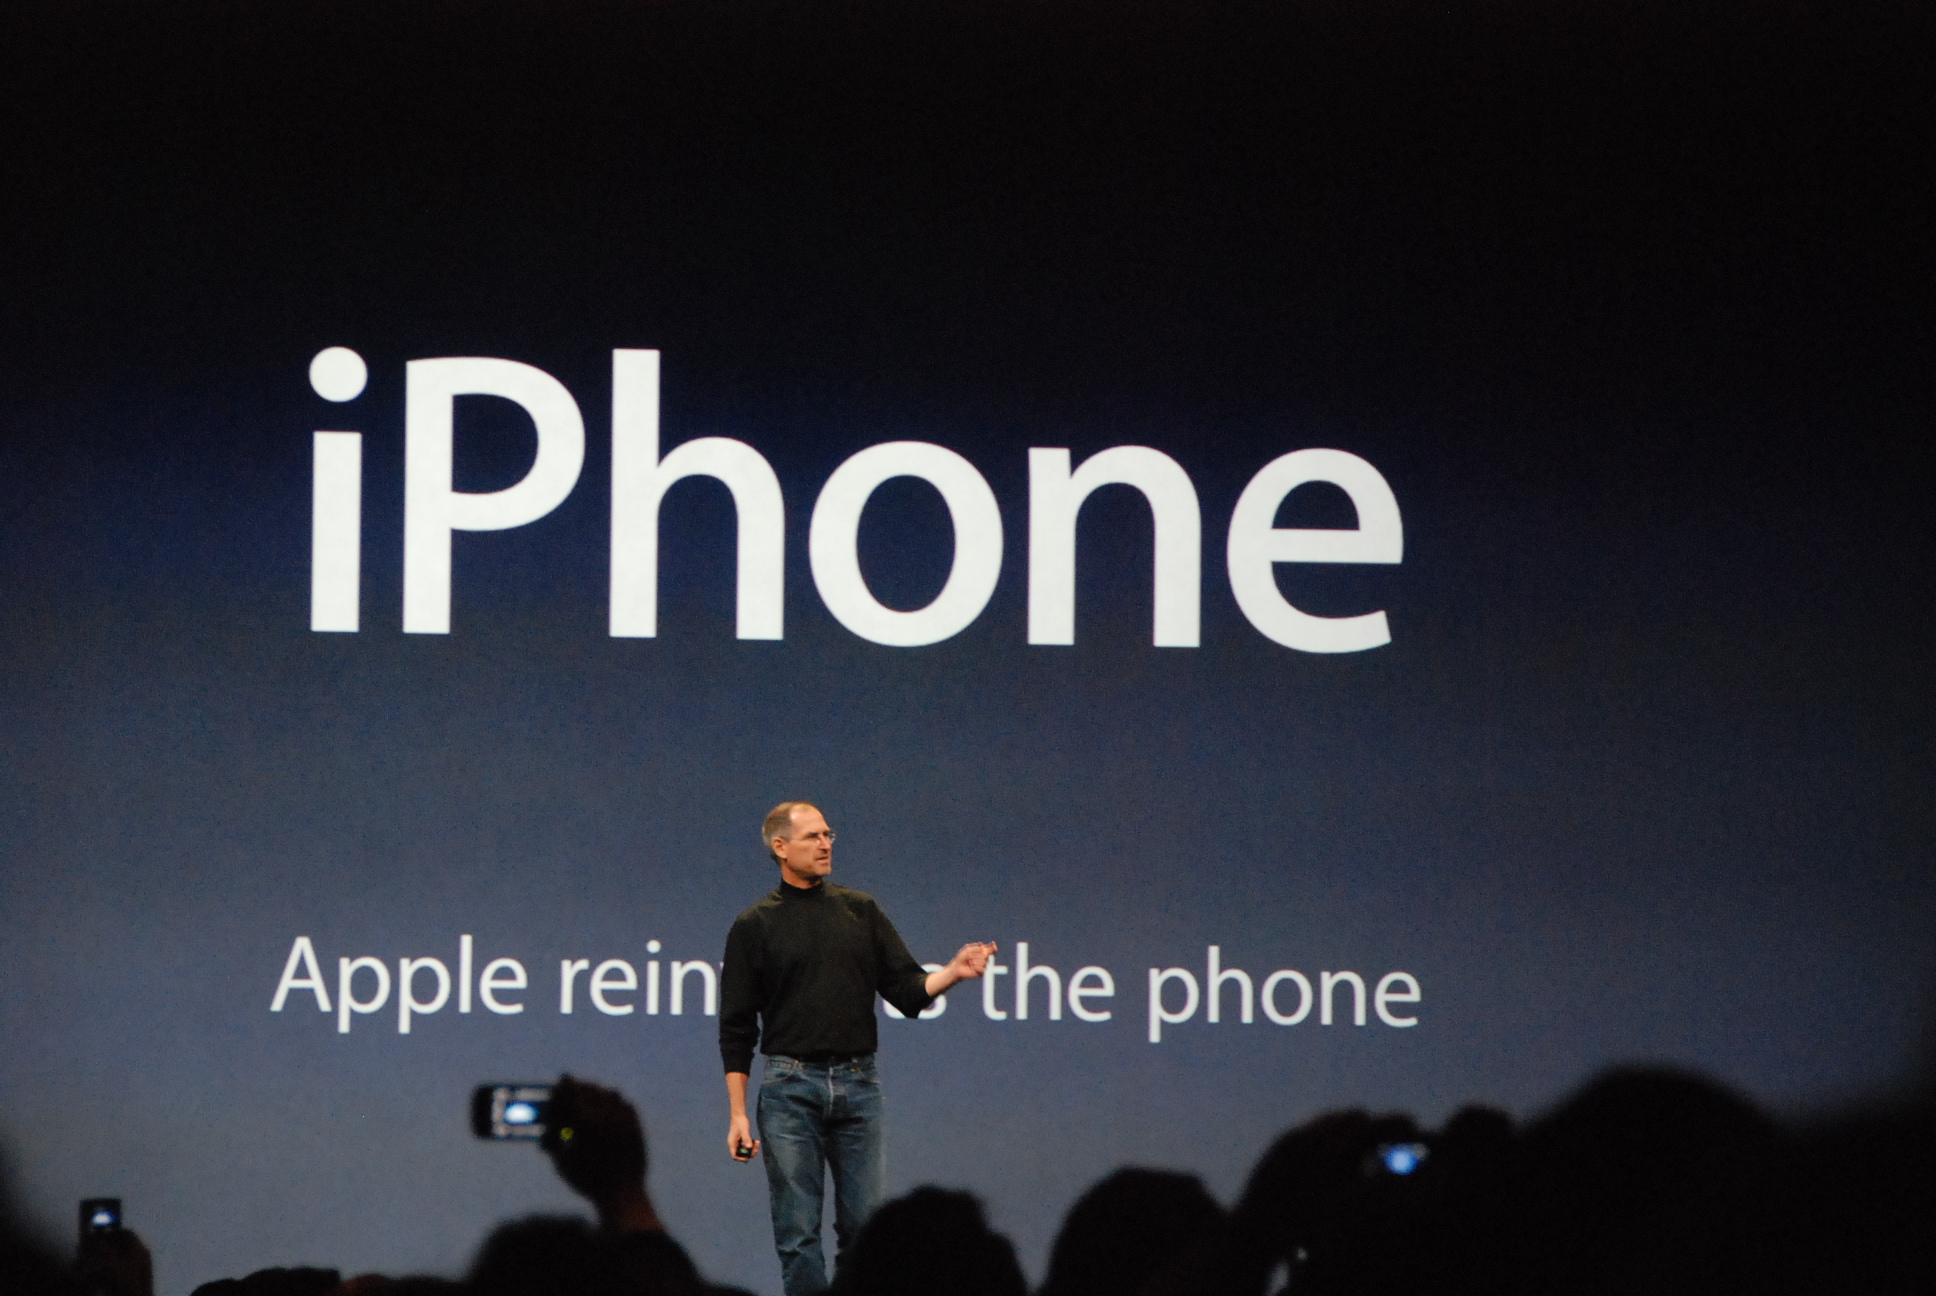 Steve Jobs standing in front of slide at the January 2007 iPhone introduction showing the tagline "Apple reinvents the phone"